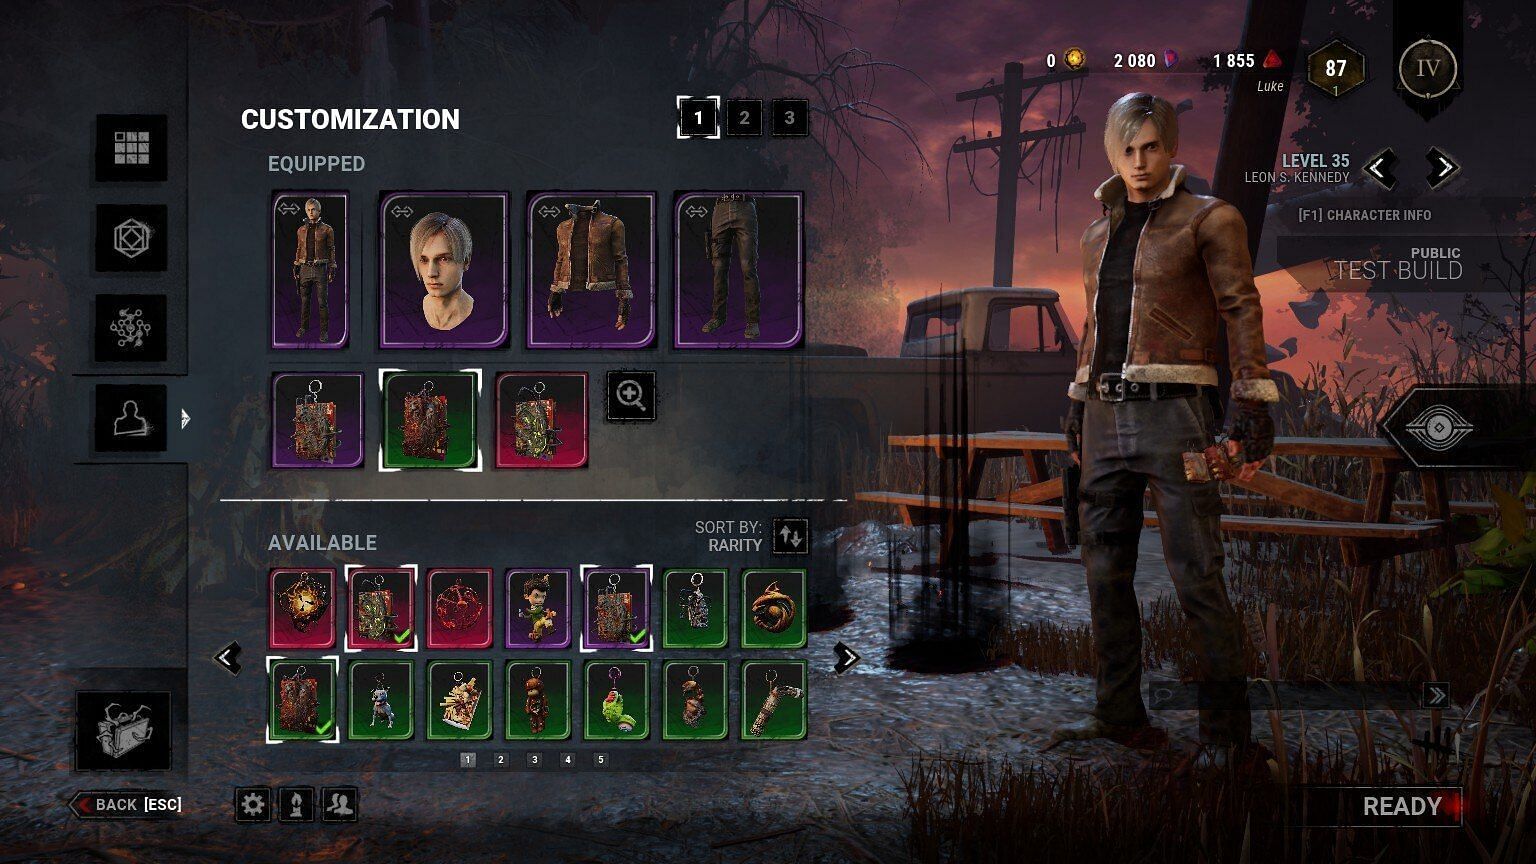 Leon Kennedy&#039;s Resident Evil 4 cosmetic set as seen in-game (Image via Behaviour Interactive)